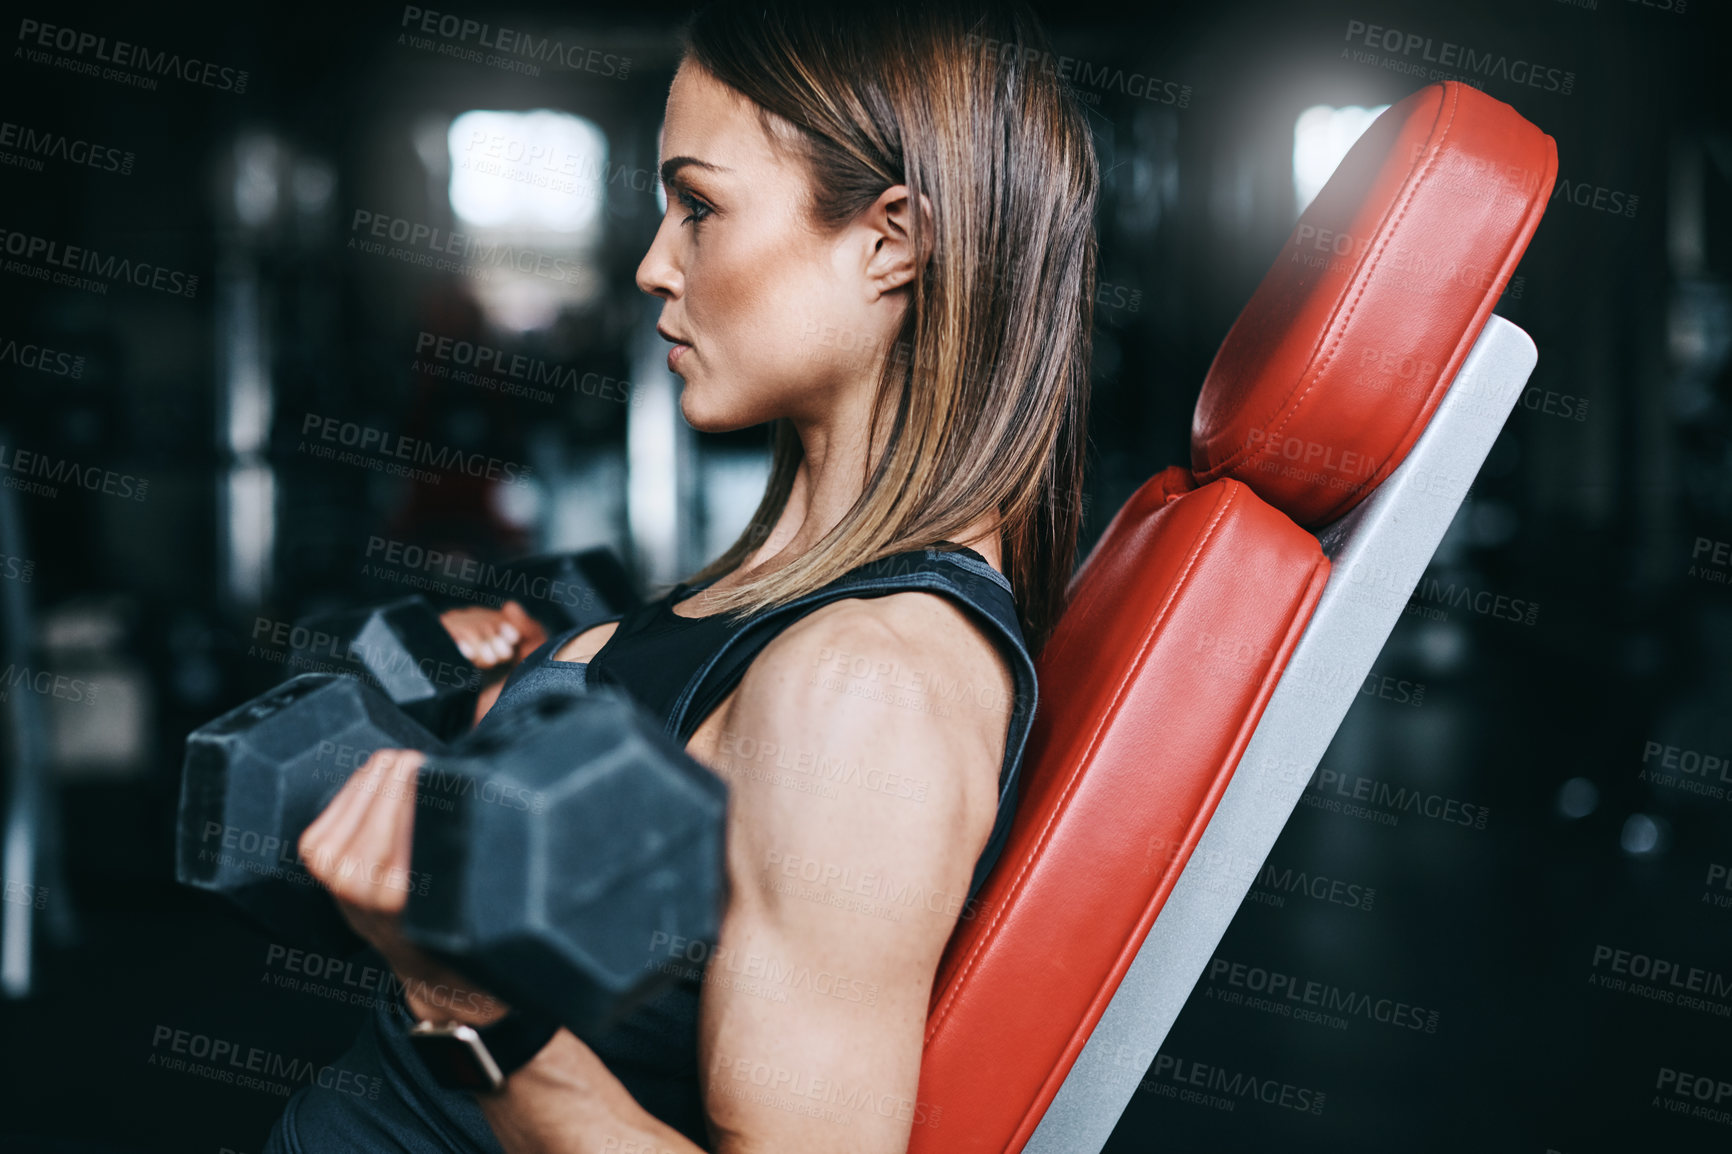 Buy stock photo Shot of a young woman working out with weights in a gym